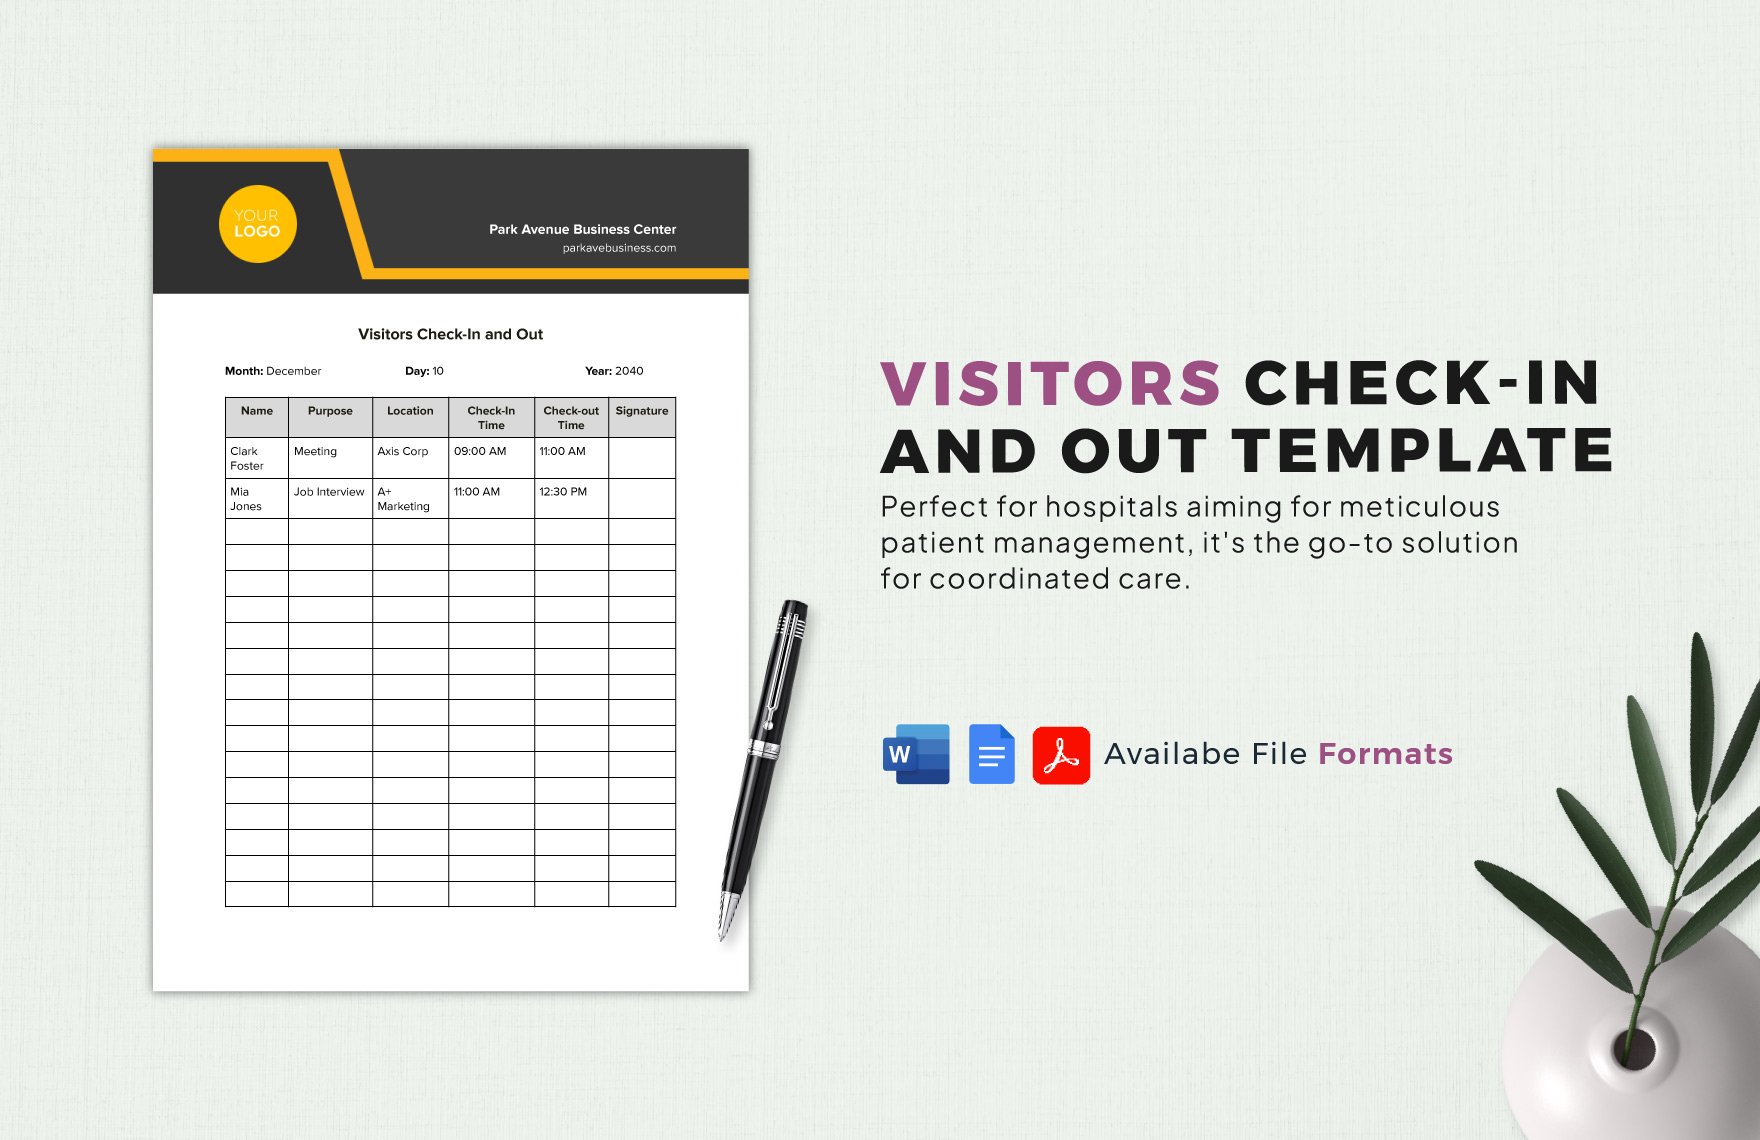 Visitors Check-in and Out Template